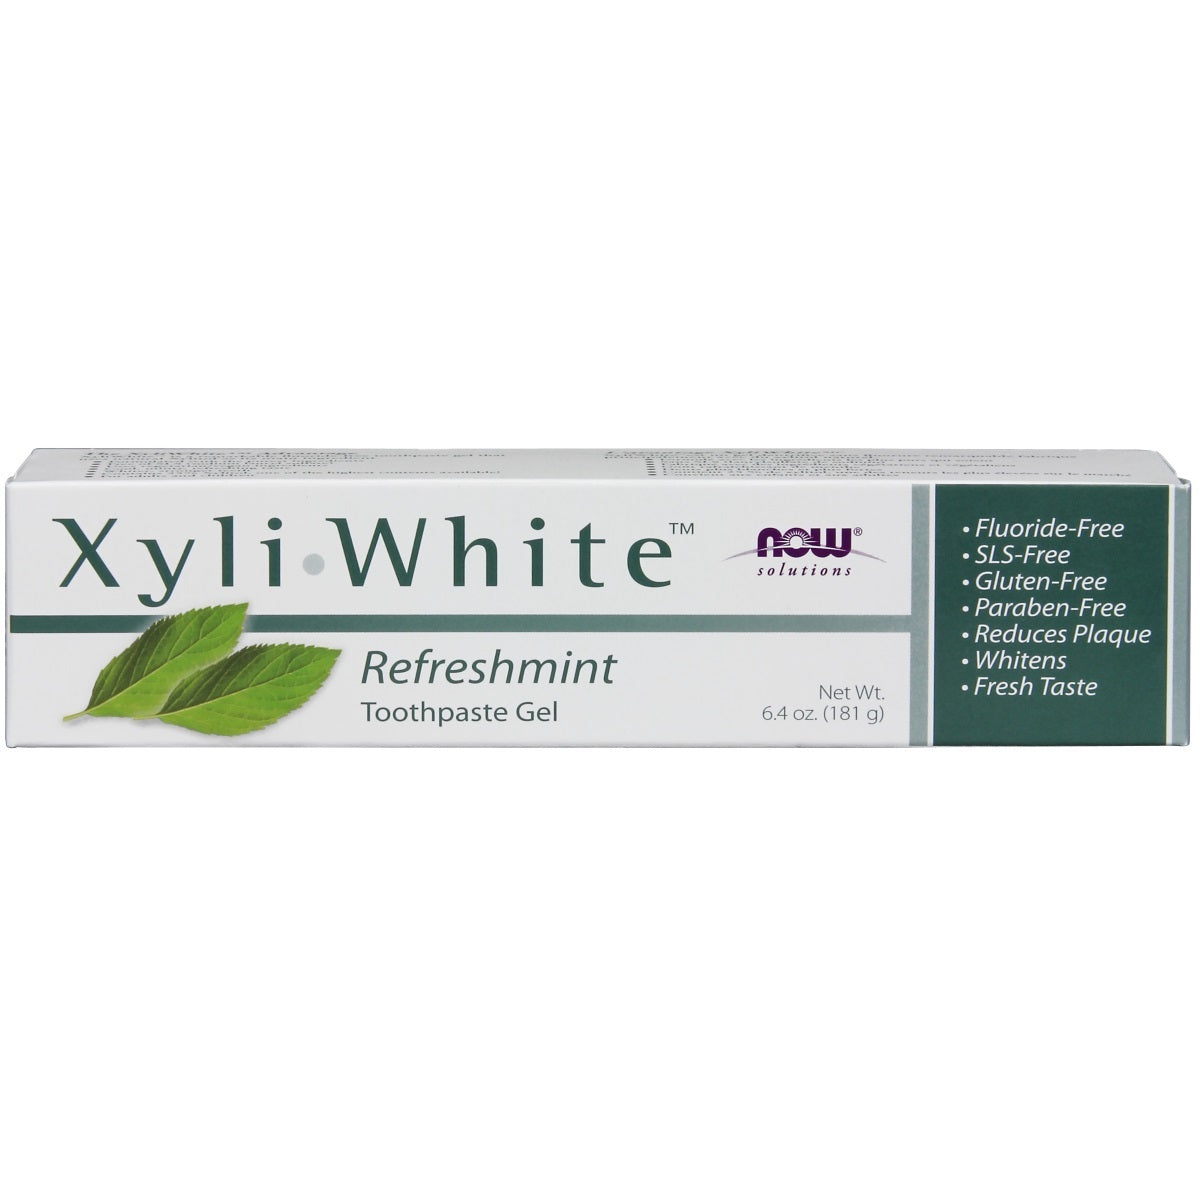 Primary image of Xyli-Toothpaste - Refreshmint